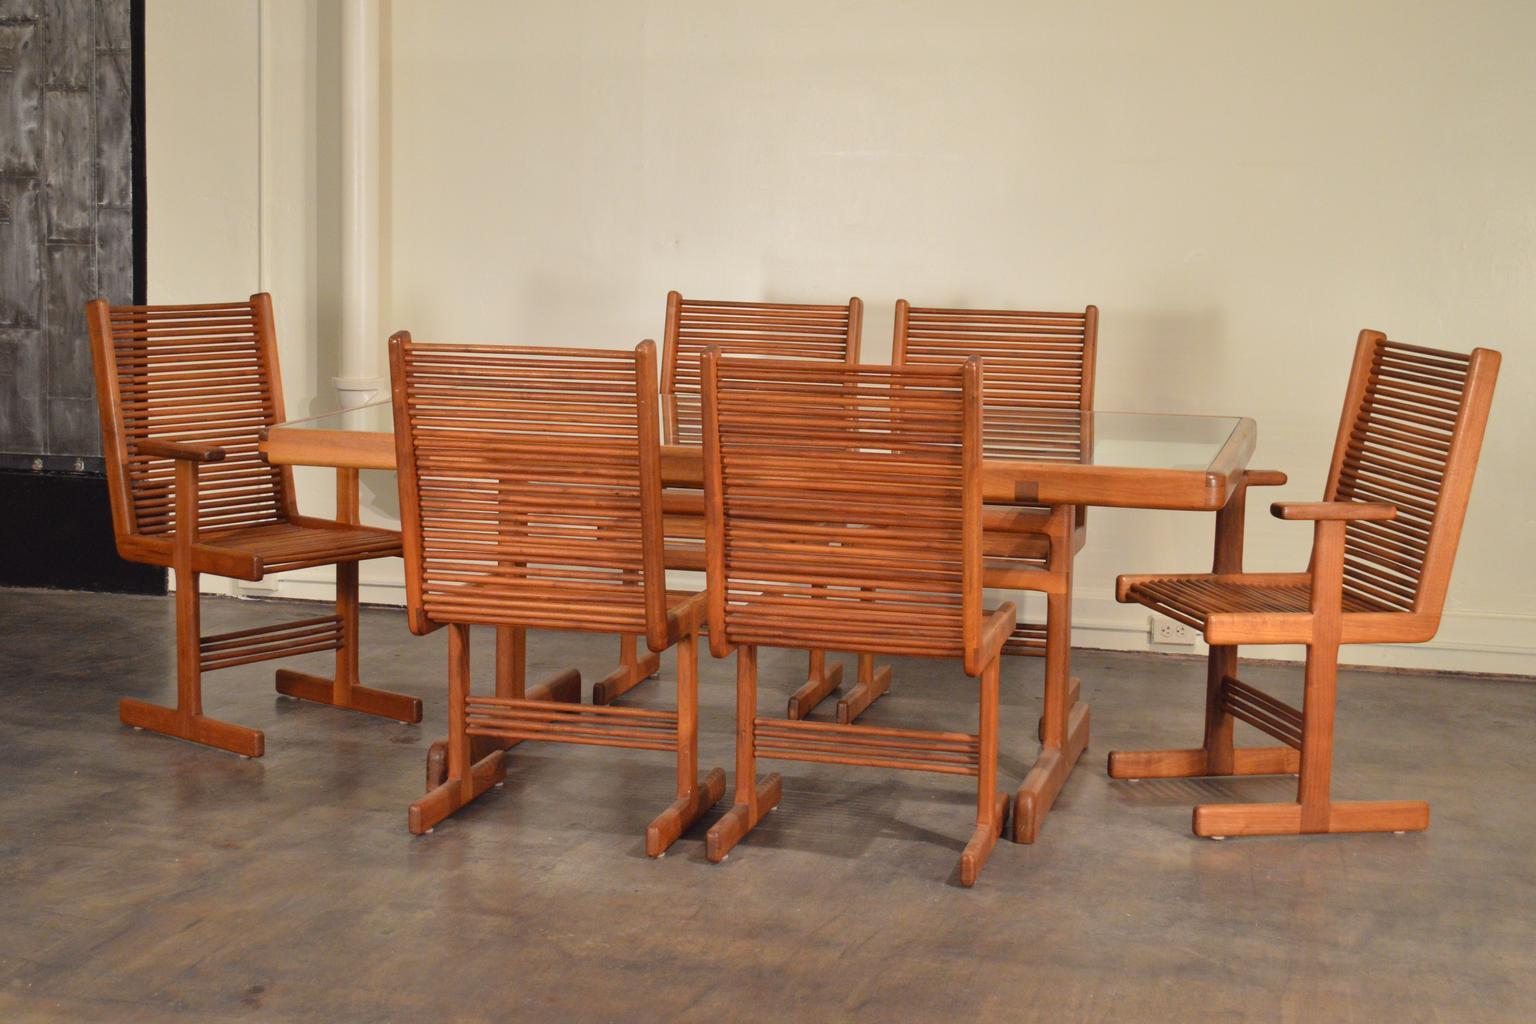 Hawaiian woodworker Stephen Hynson designed these chairs, custom made and branded 